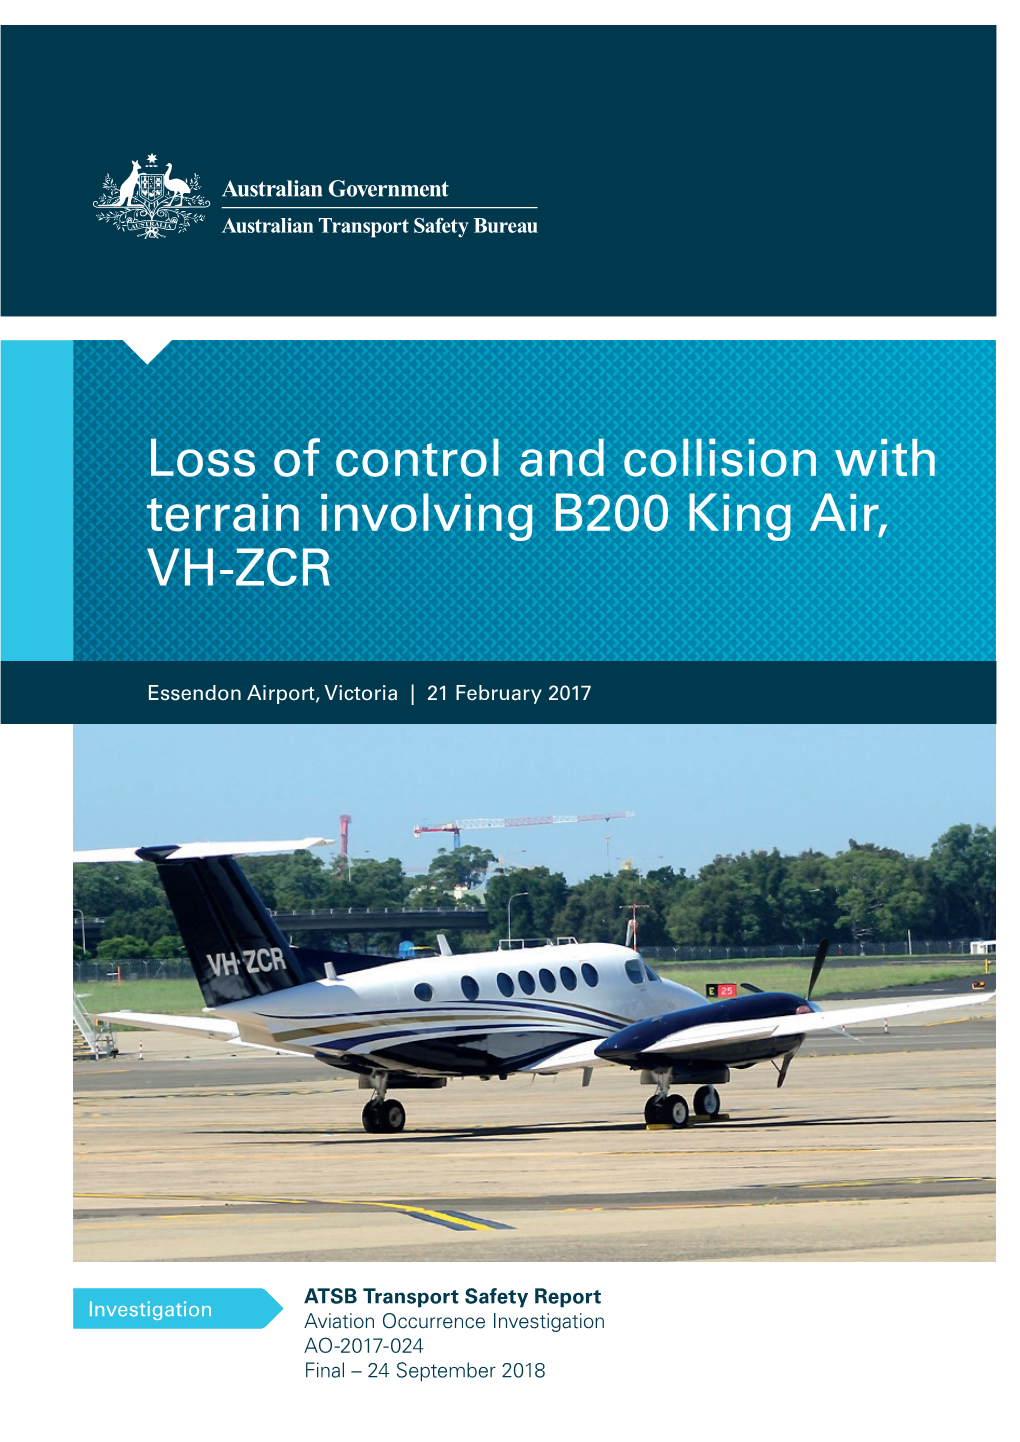 Loss of Control and Collision with Terrain Involving B200 King Air, VH-ZCR, Essendon Airport, Victoria on 21 February 2017